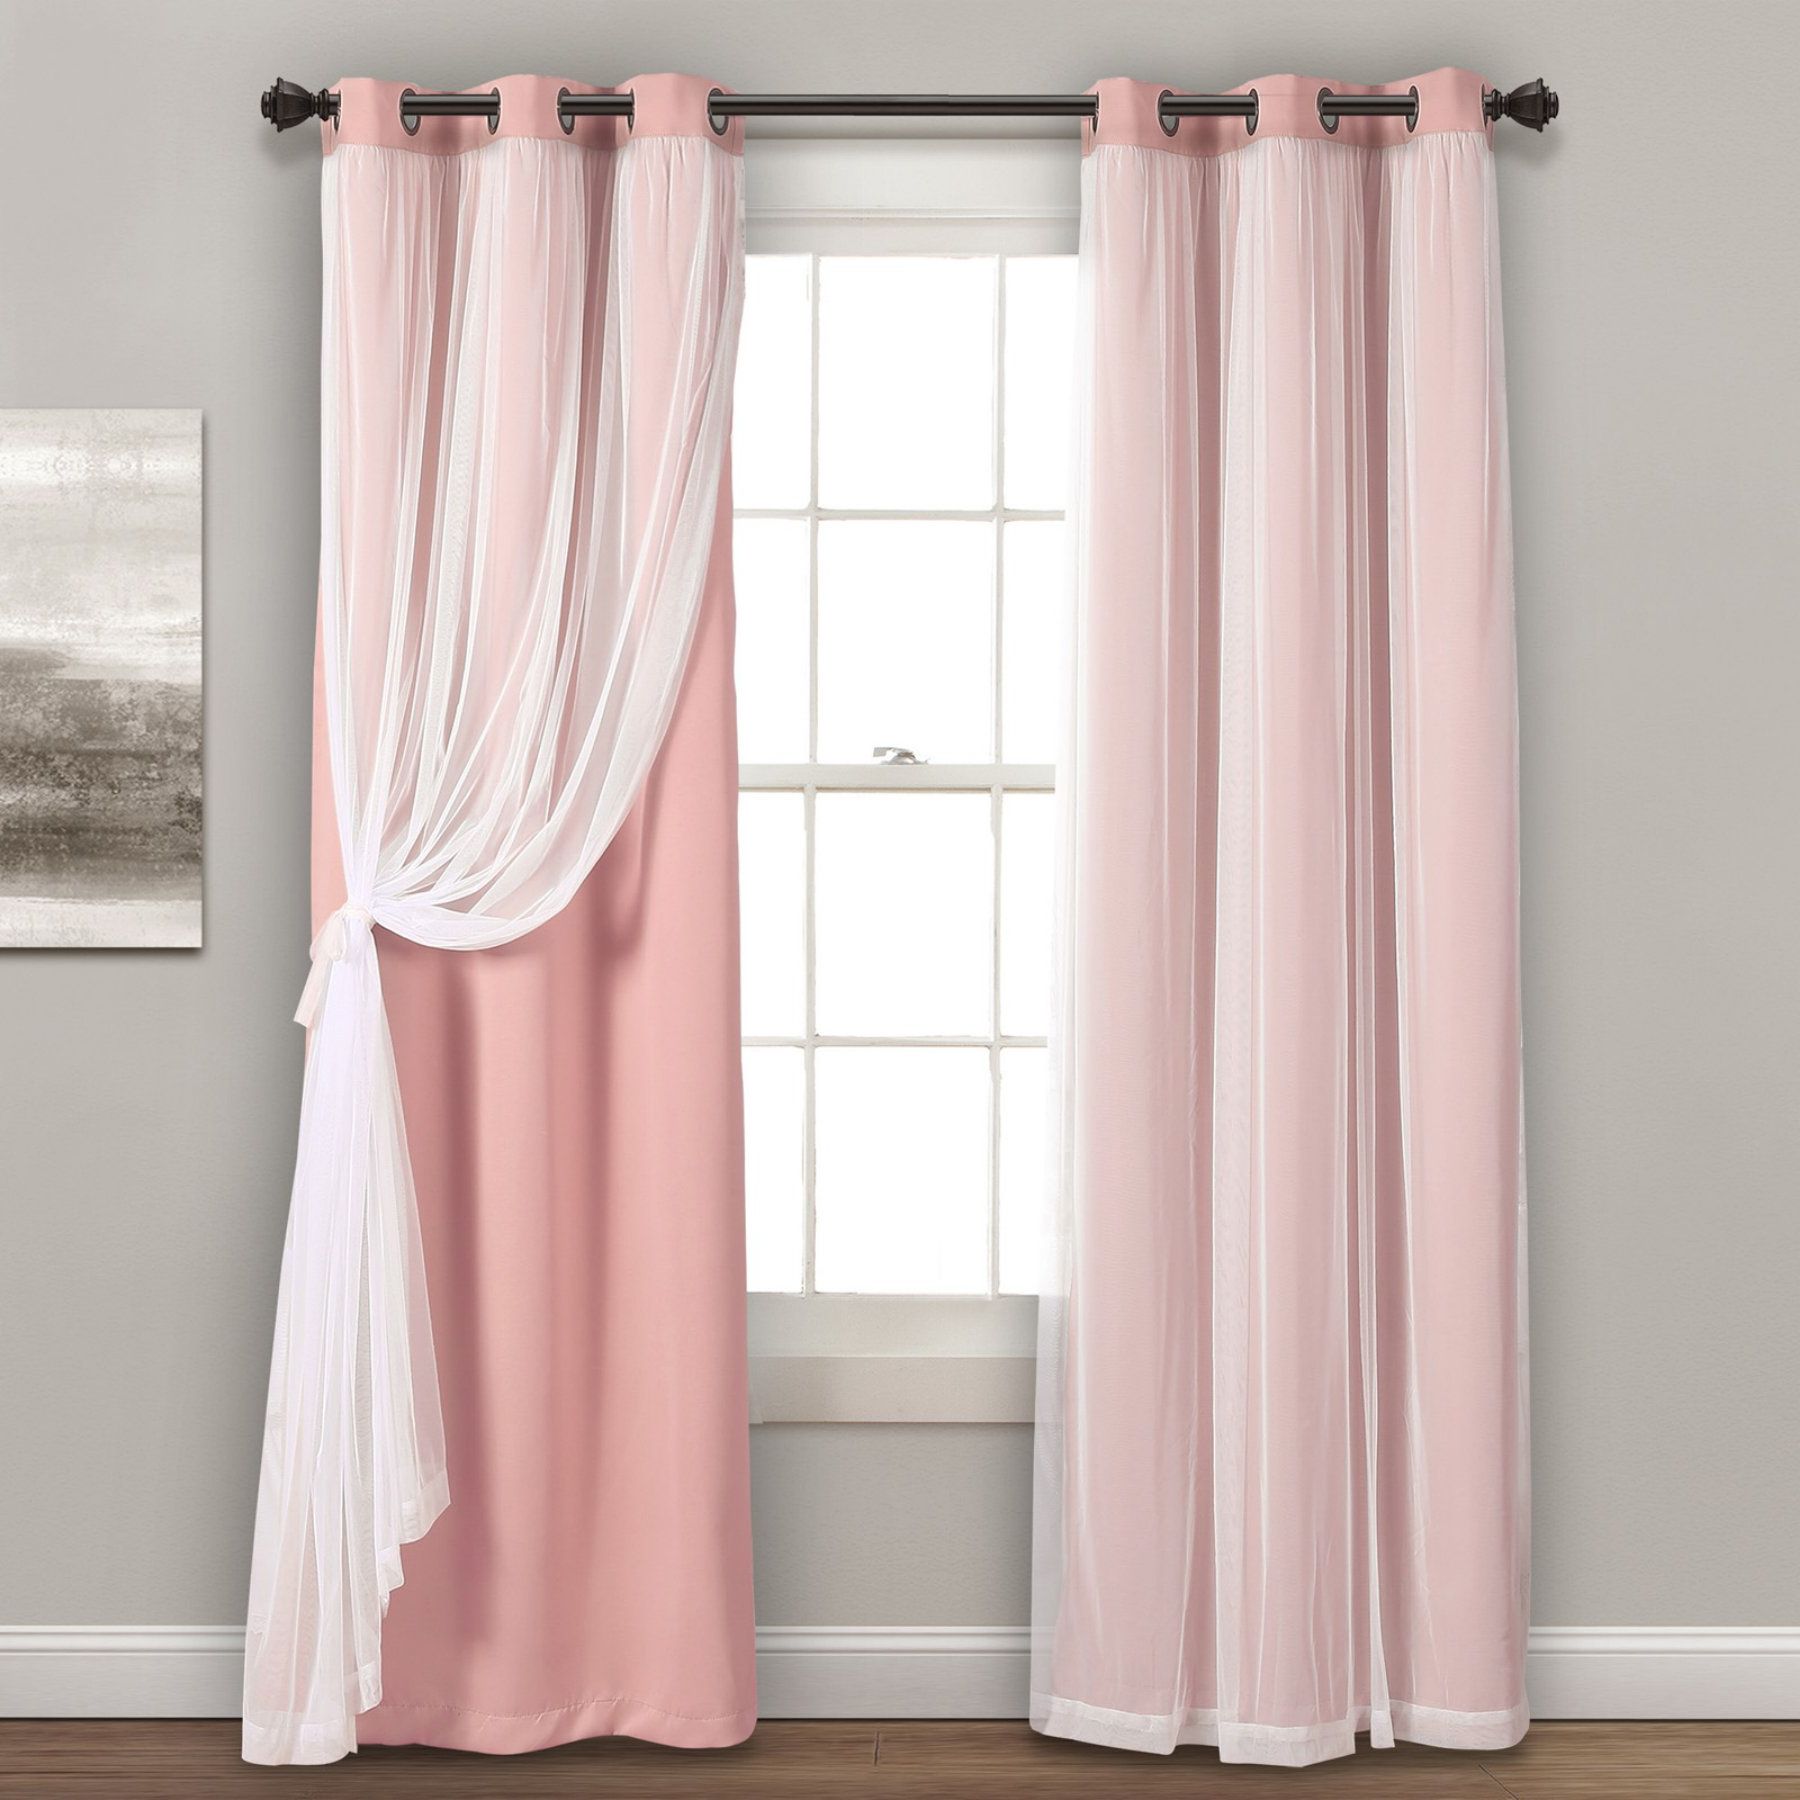 Lydia Ruffle Window Curtain Panel Pairs Regarding Popular Lush Decor Black Out Grommet Panel Pair With Sheer Panels (View 18 of 20)